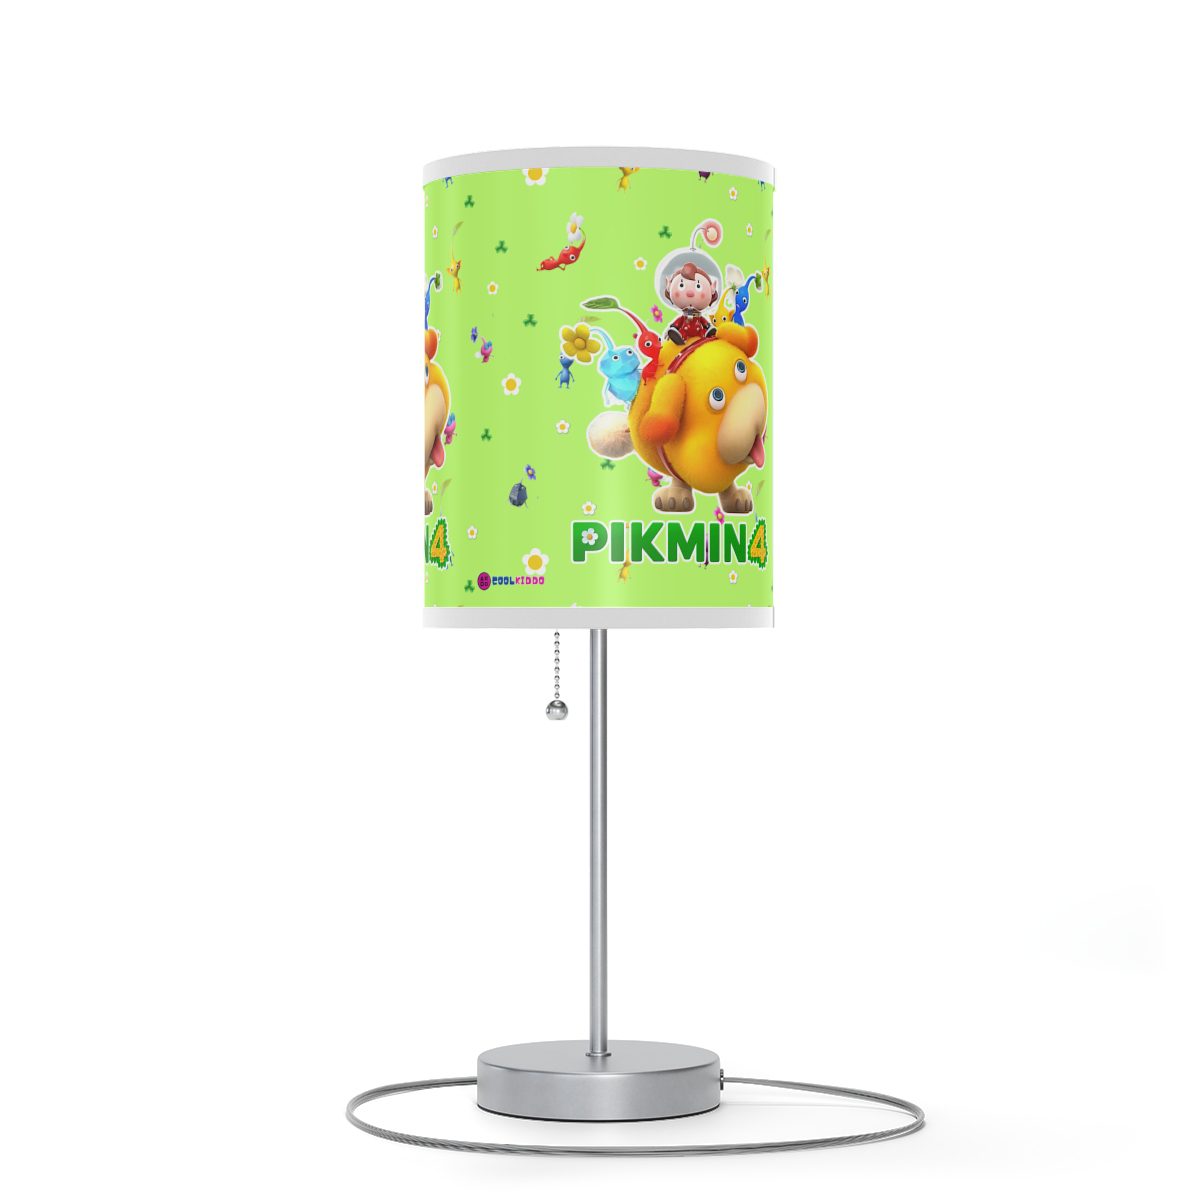 Pikmin 4 videogame Green Lamp on a Stand Cool Kiddo 28